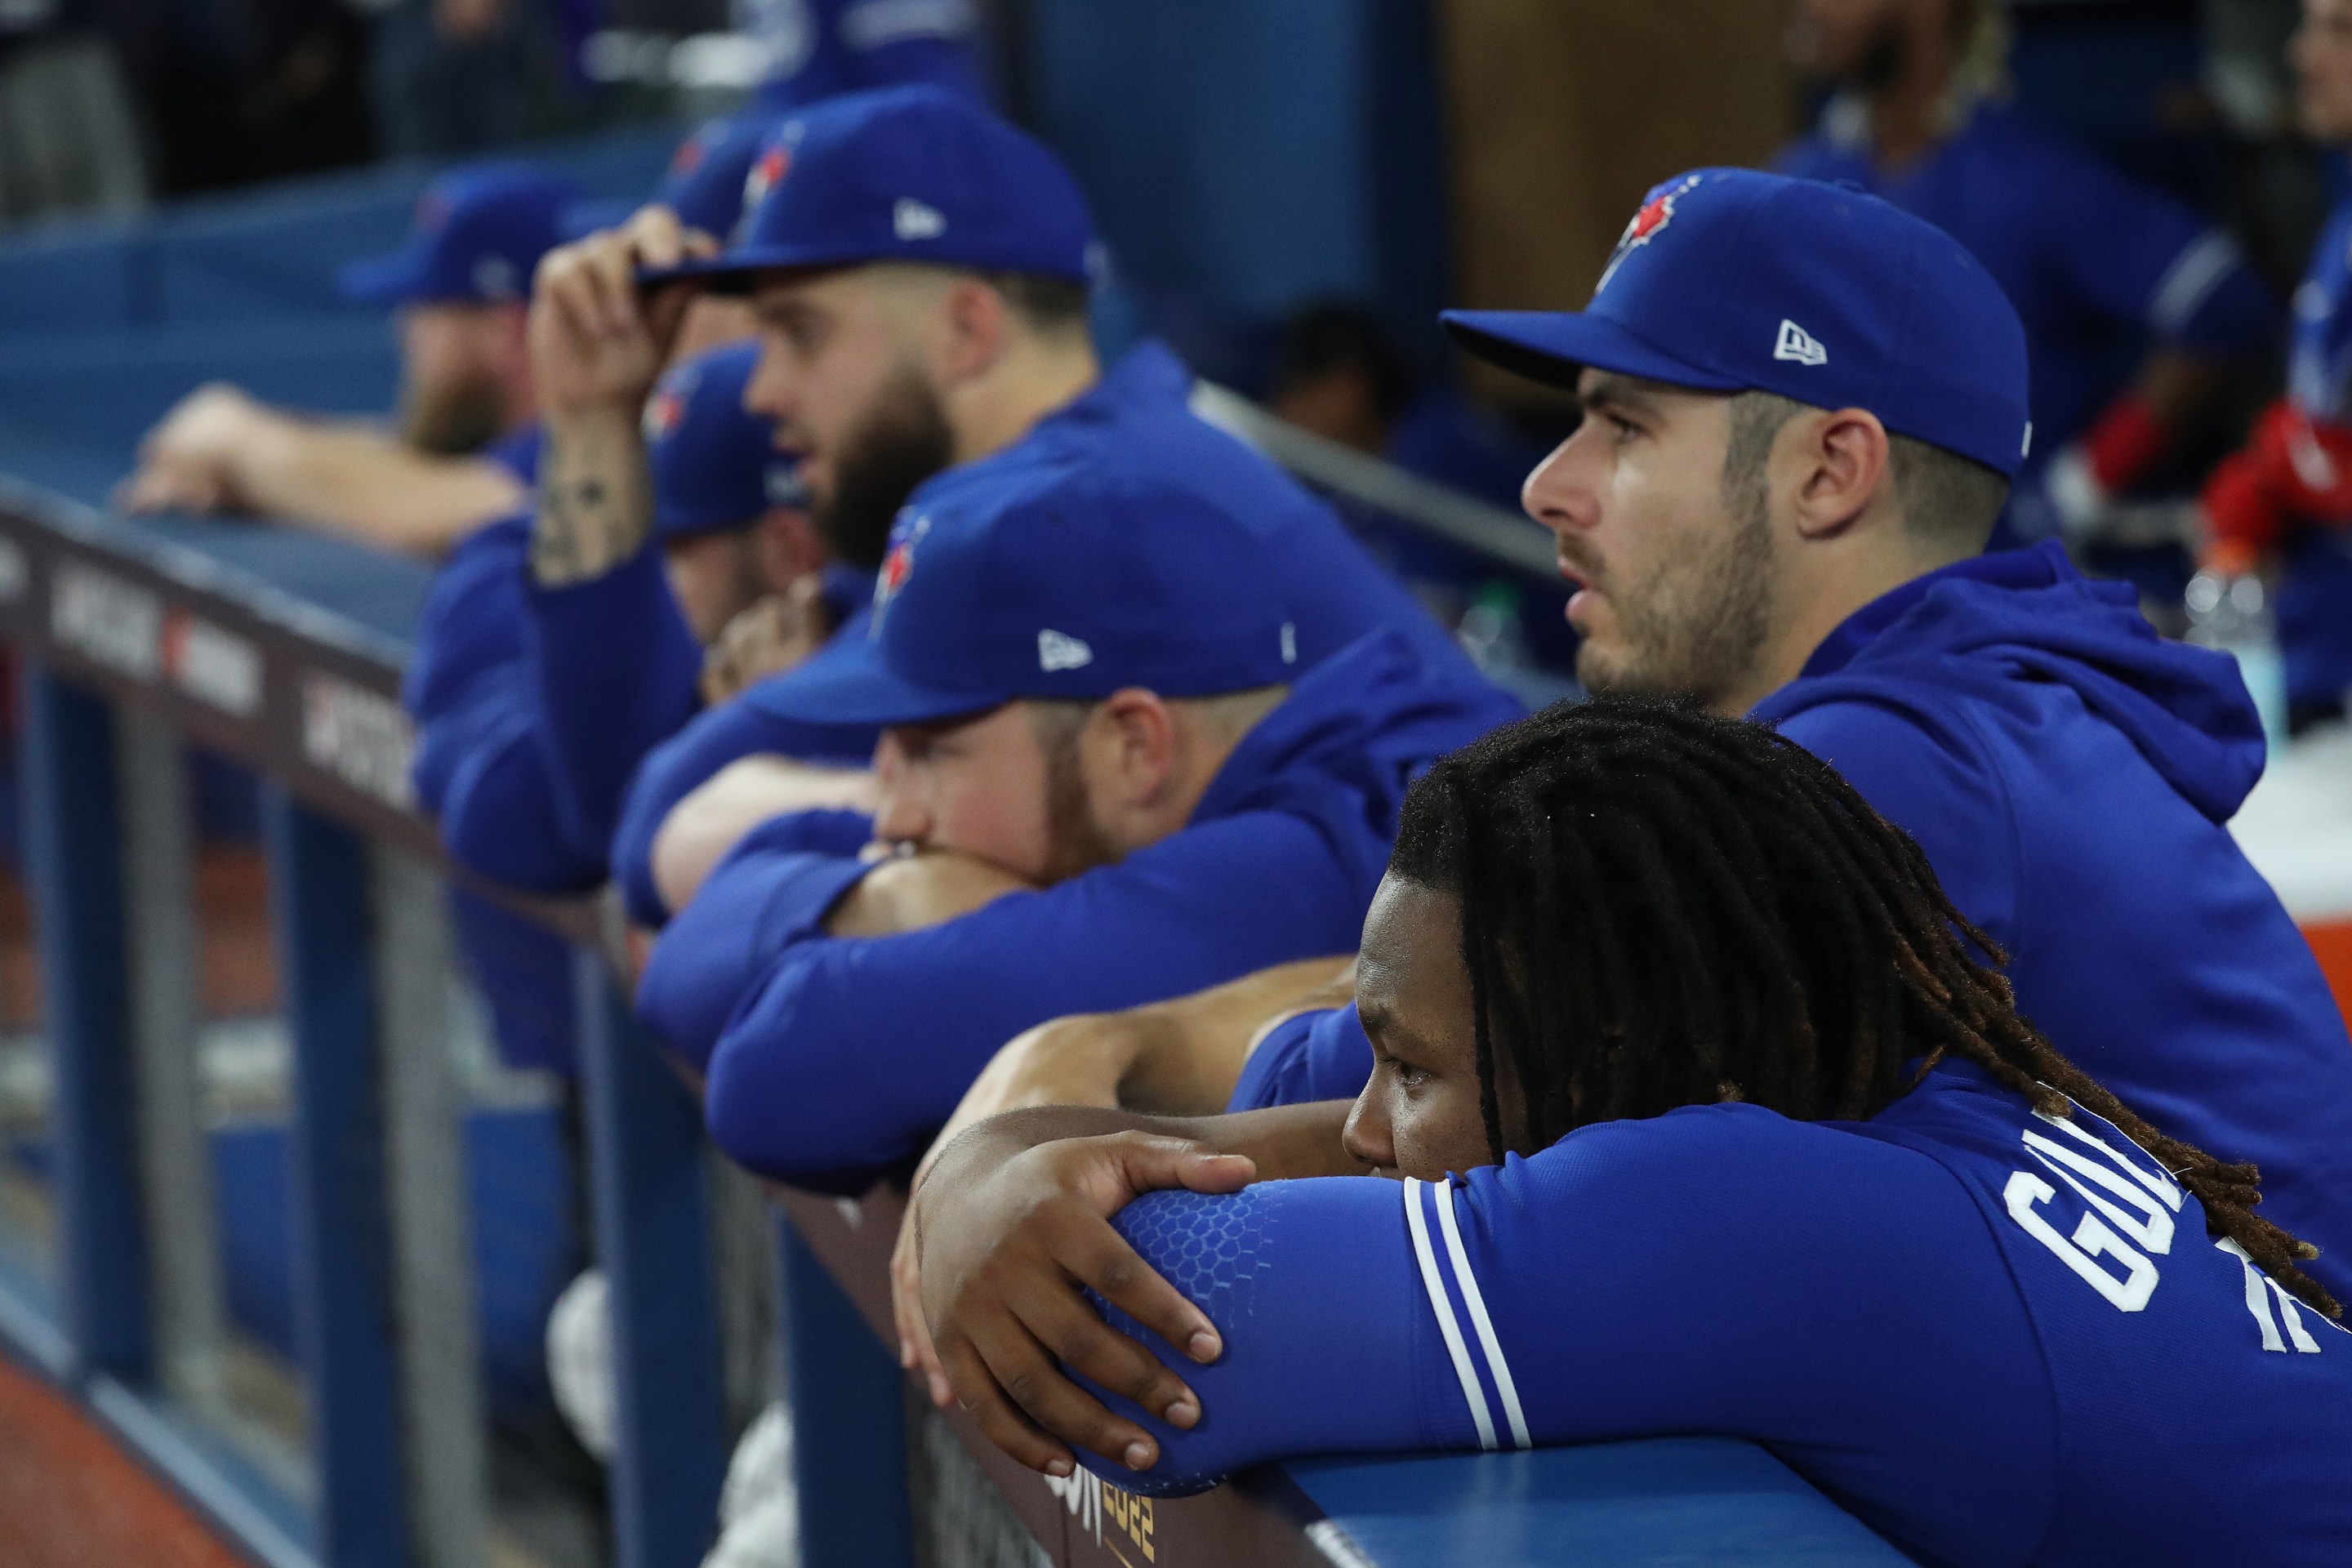 Toronto Blue Jays first baseman Vladimir Guerrero Jr. (27) watches the Seattle Mariners celebrate as the Toronto Blue Jays fall to the Seattle Mariners 10-9 in game two losing their American League Wild Card series at Rogers Centre in Toronto. October 8, 2022.